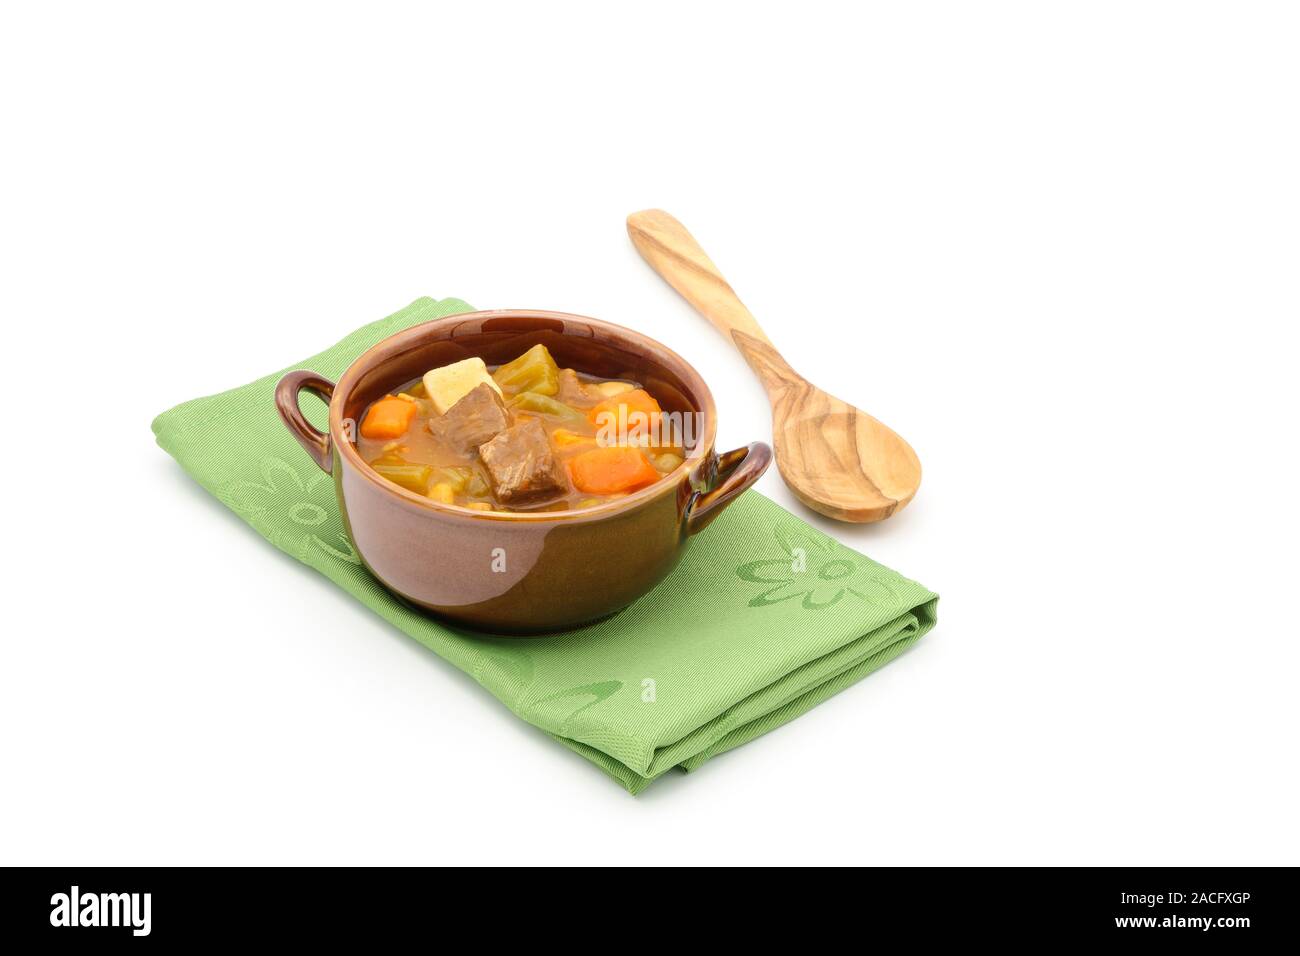 Bowl of hearty beef stew on a green napkin on a white background photographed from a high angle. Stock Photo